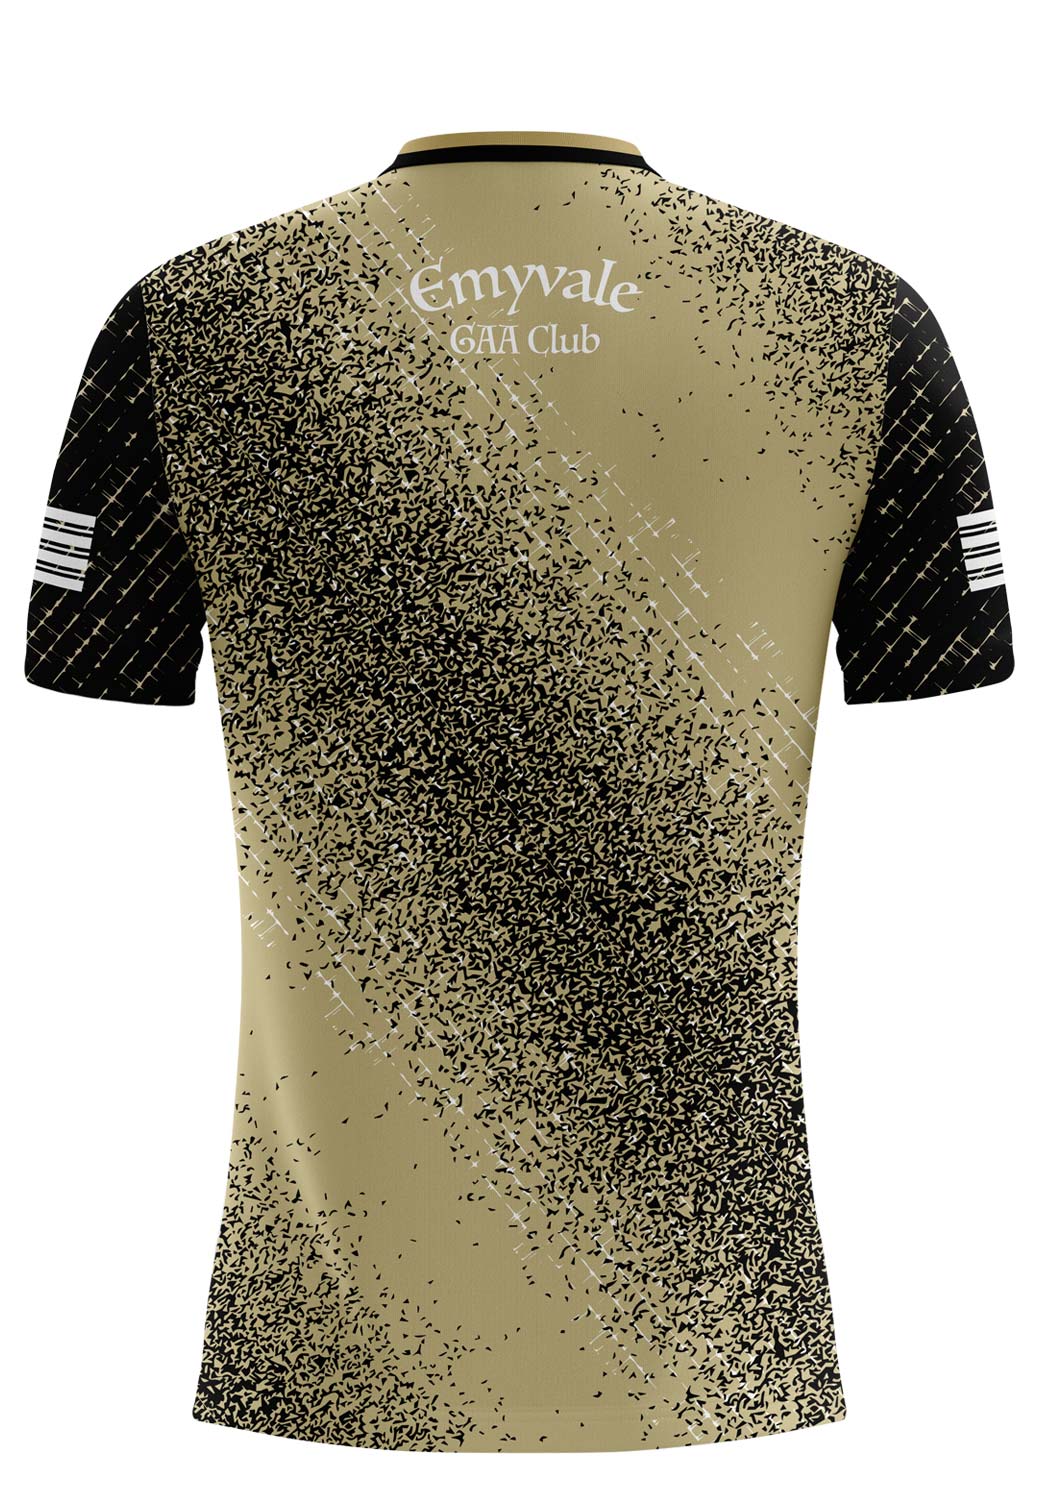 Emyvale GAA Comet Style Training Jersey Player Fit Adult